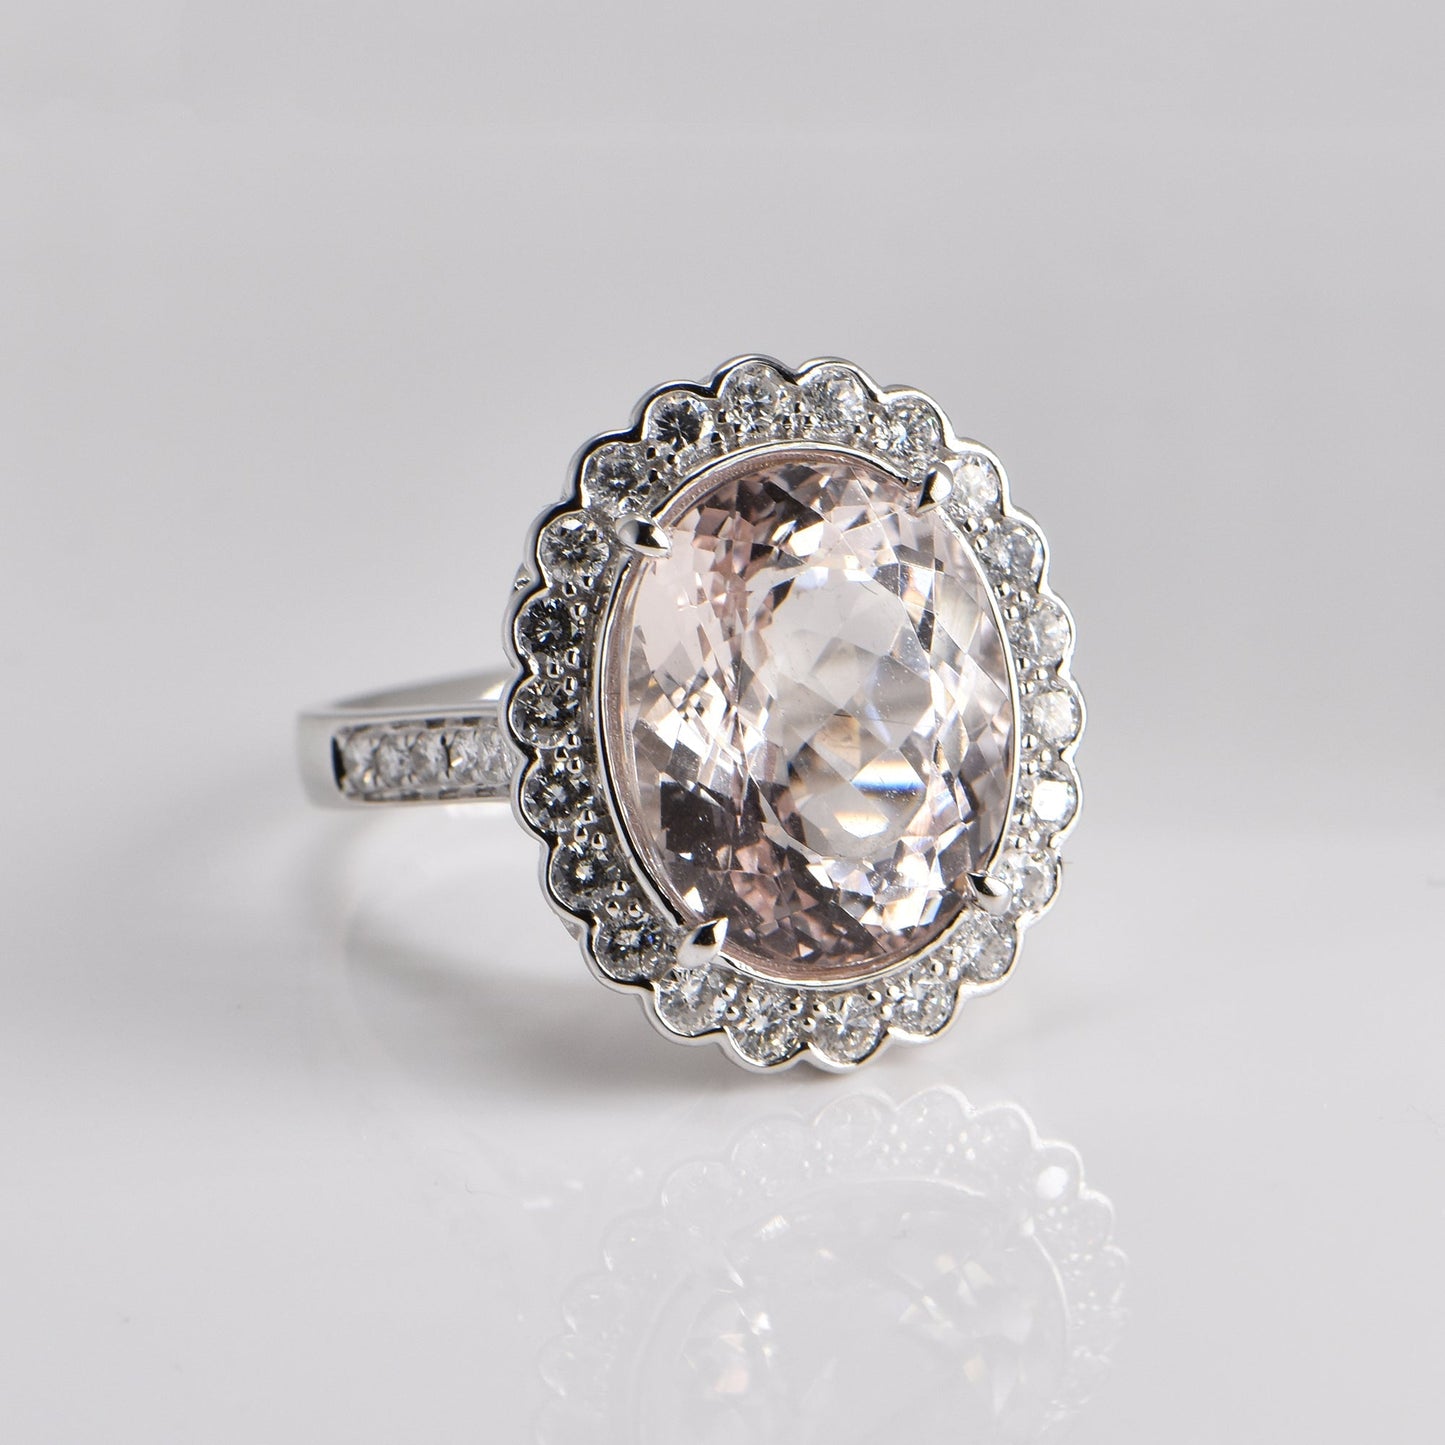 8.24ct Morganite and Diamond Ring in 18ct White Gold